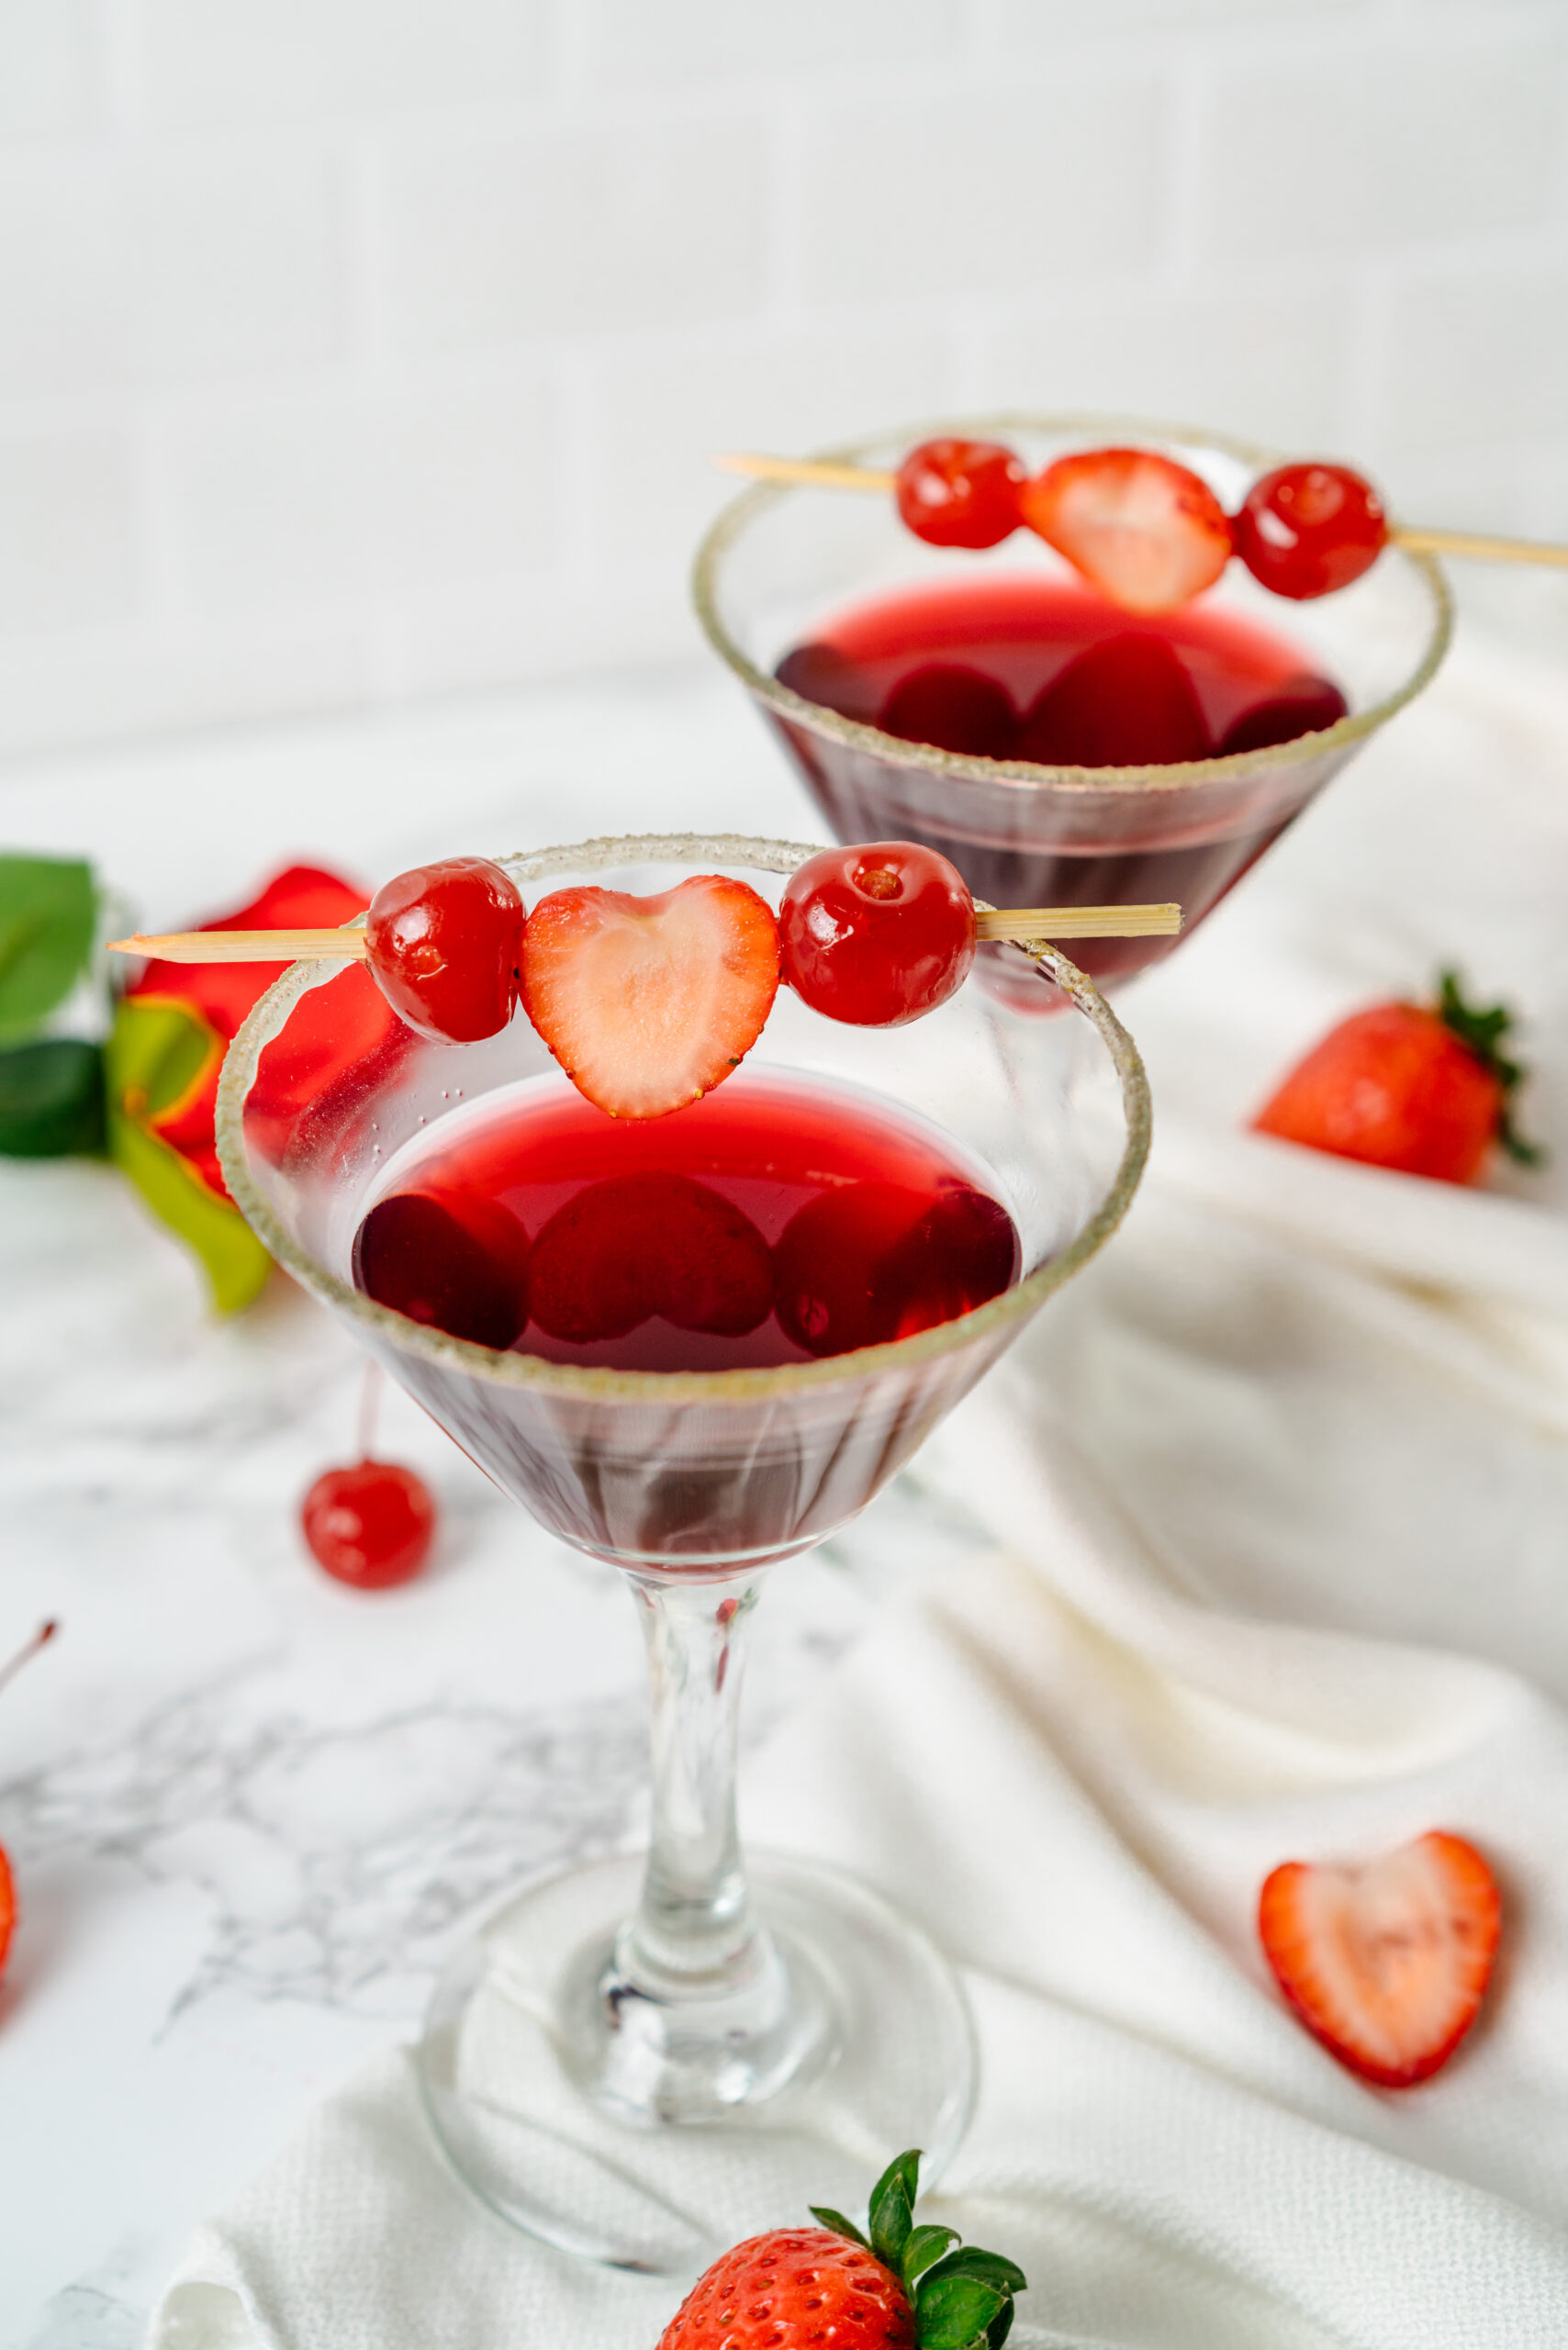 Valentine’s Day Recipes for Healthy Indulgence